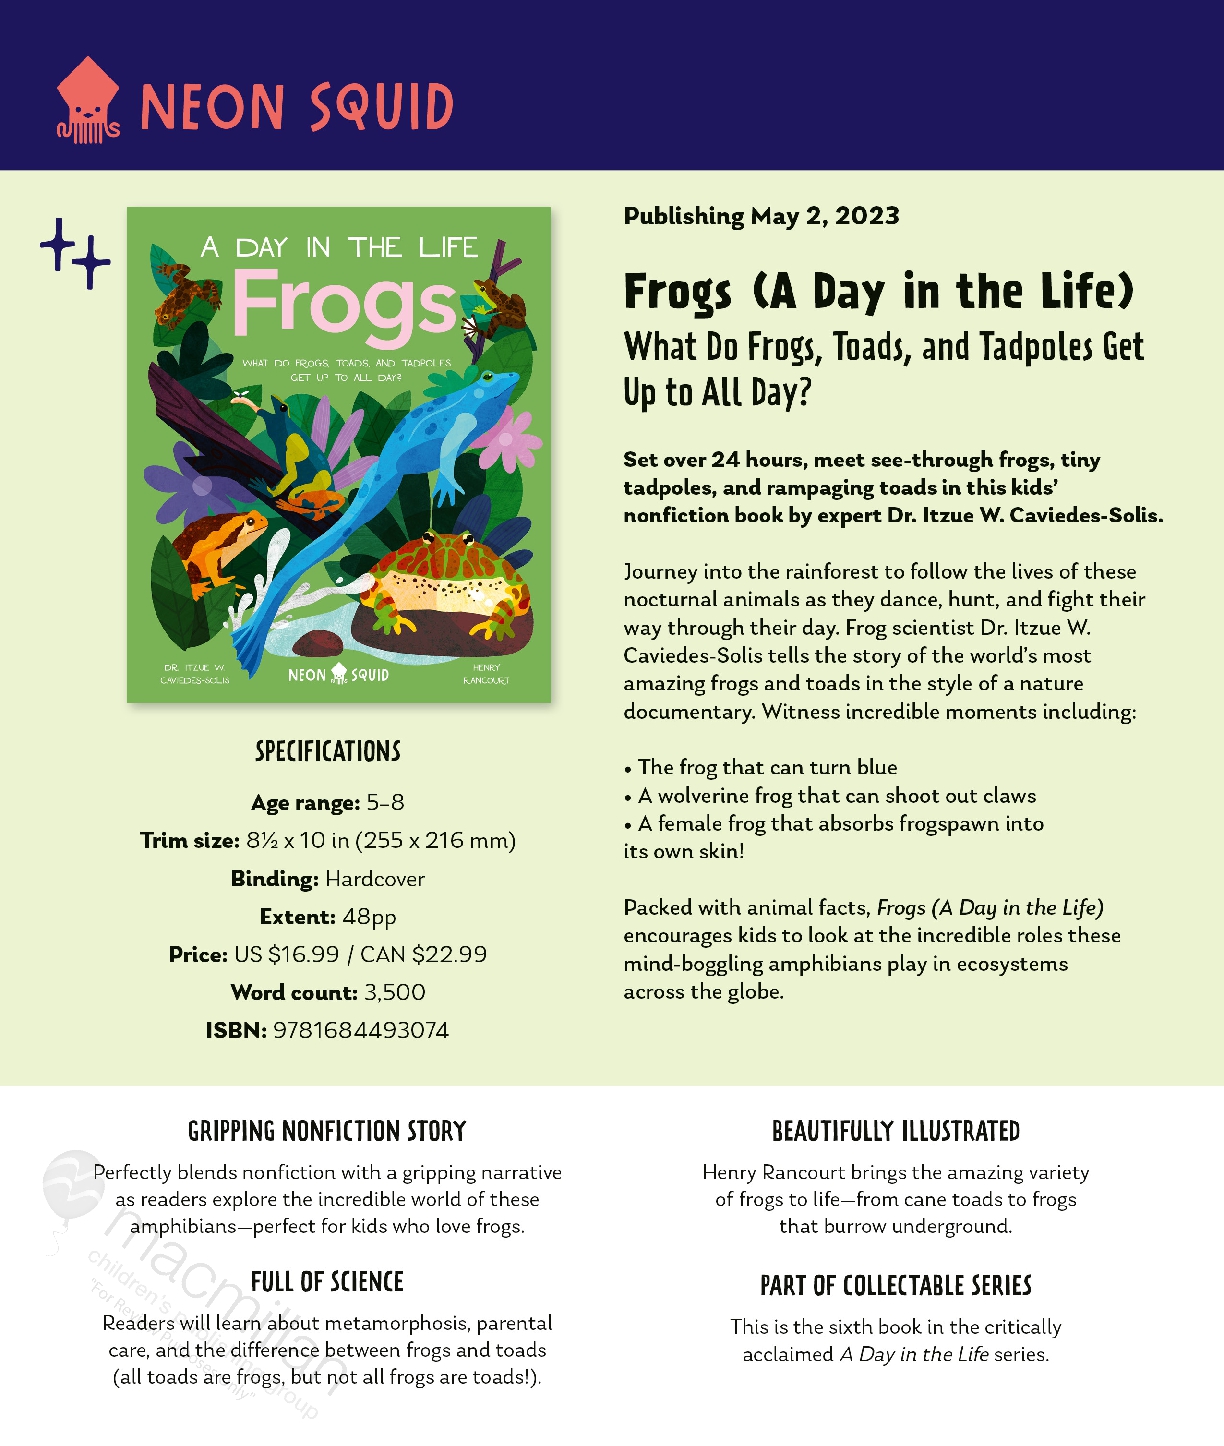 Frogs (A Day in the Life)